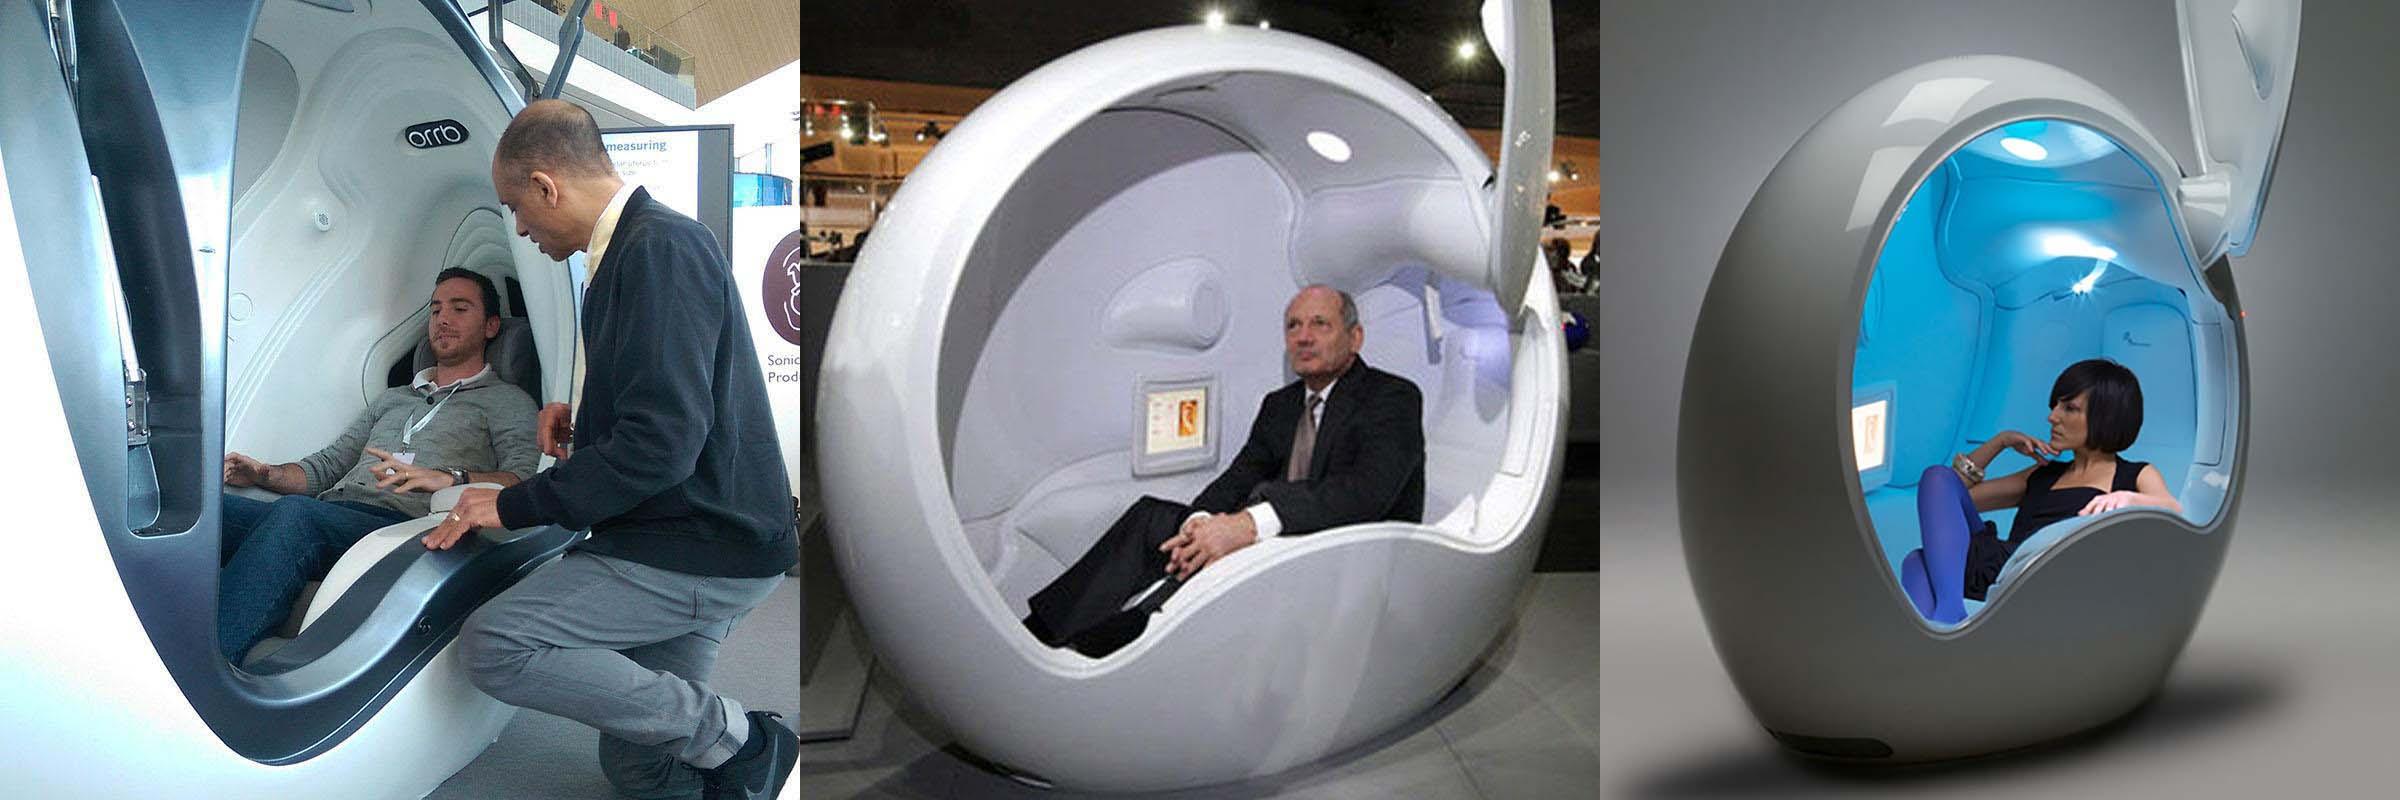 Relaxation pod